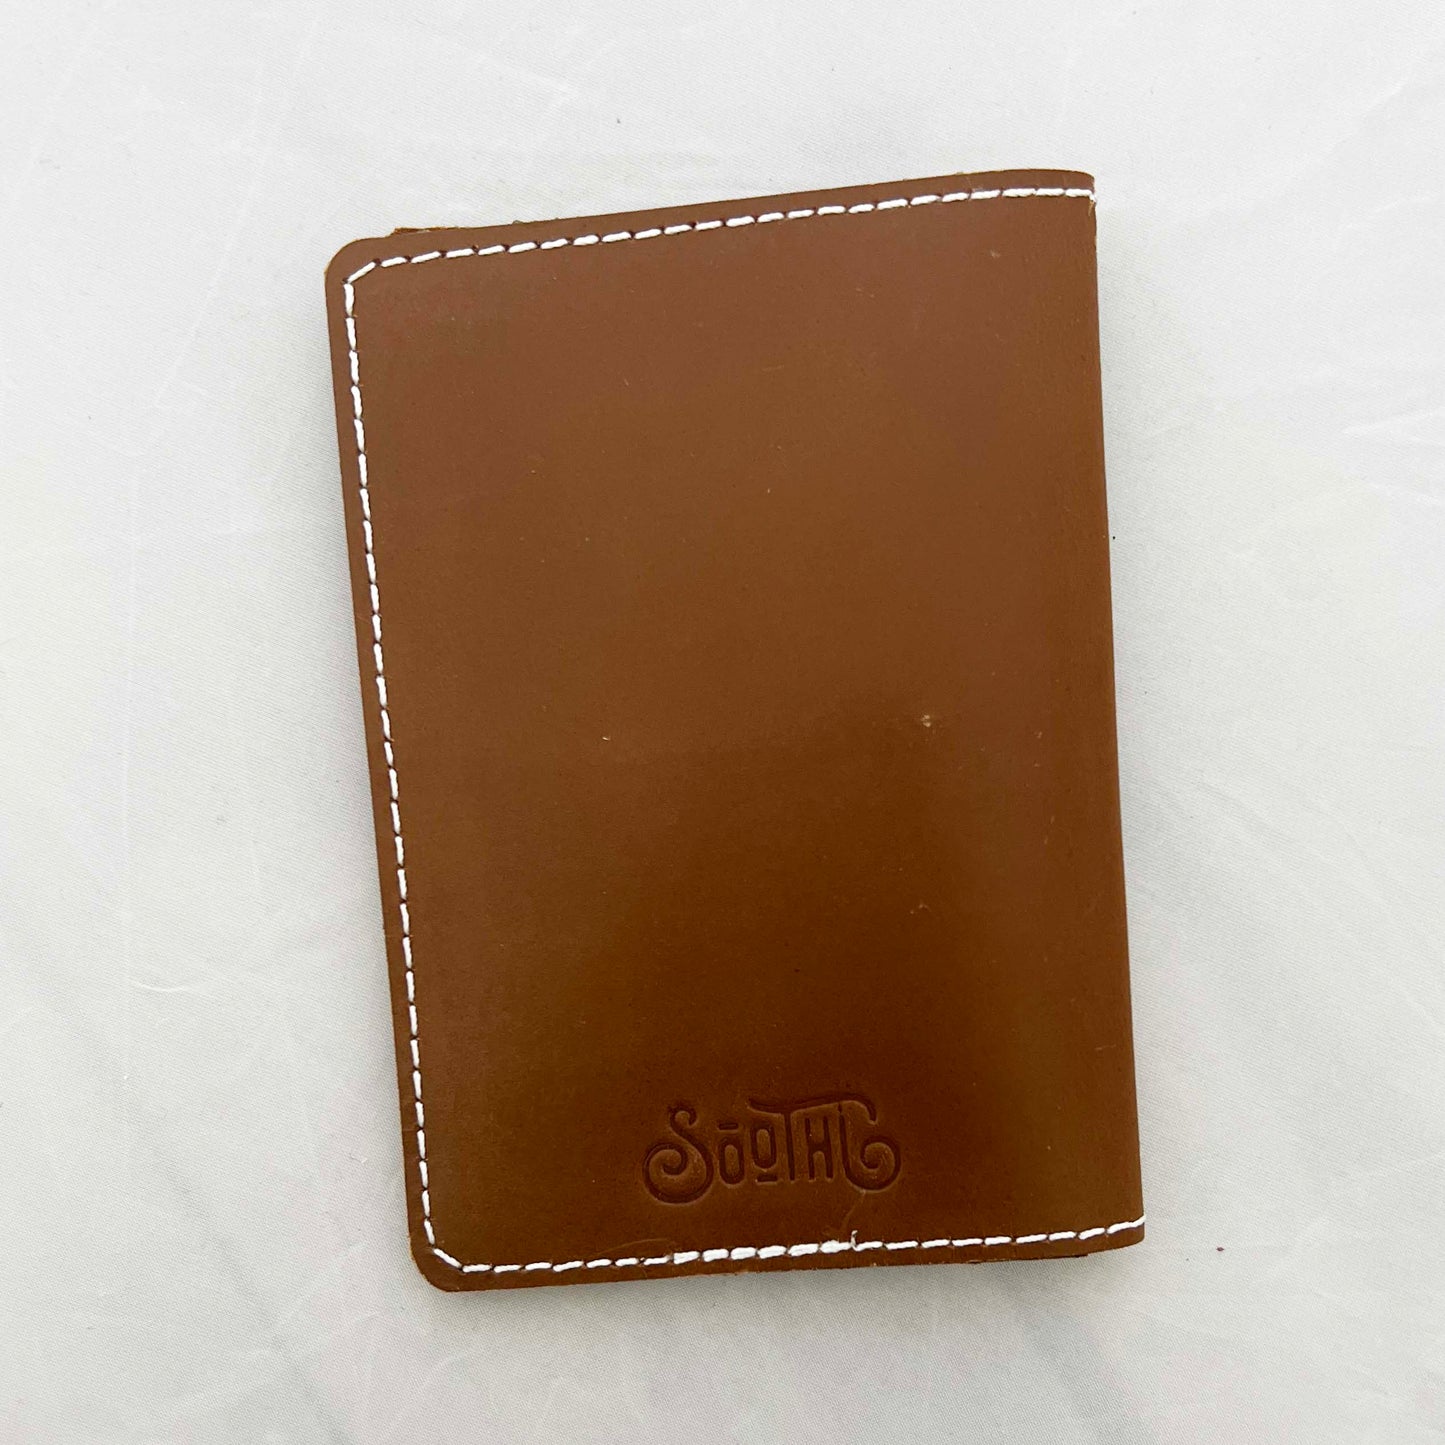 Another Adventure Leather Passport Cover Wallet